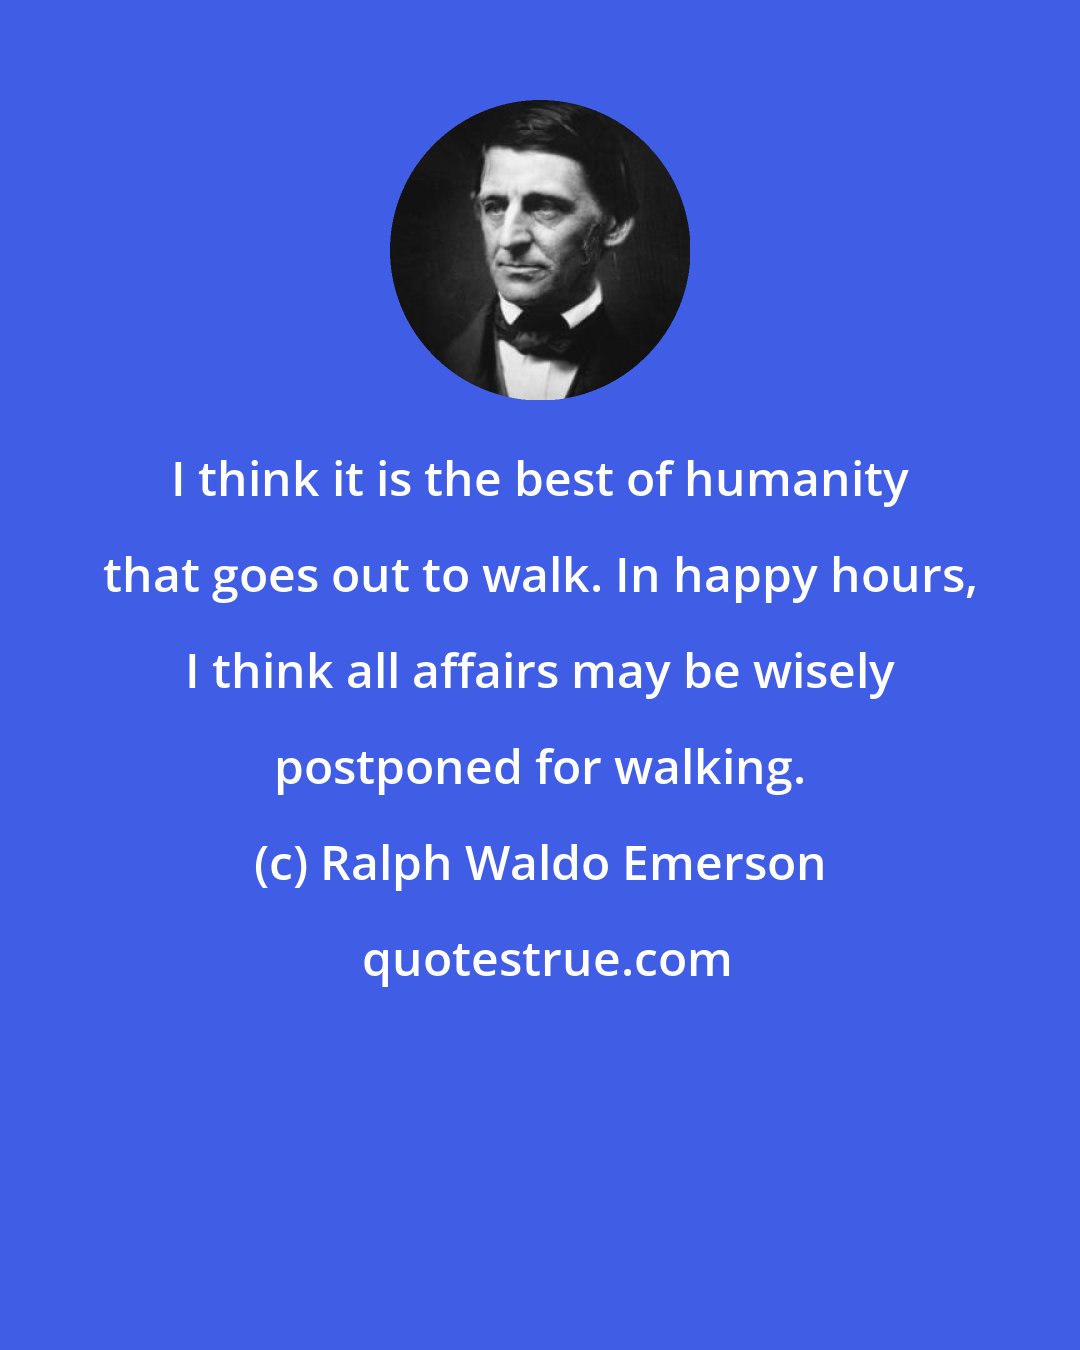 Ralph Waldo Emerson: I think it is the best of humanity that goes out to walk. In happy hours, I think all affairs may be wisely postponed for walking.